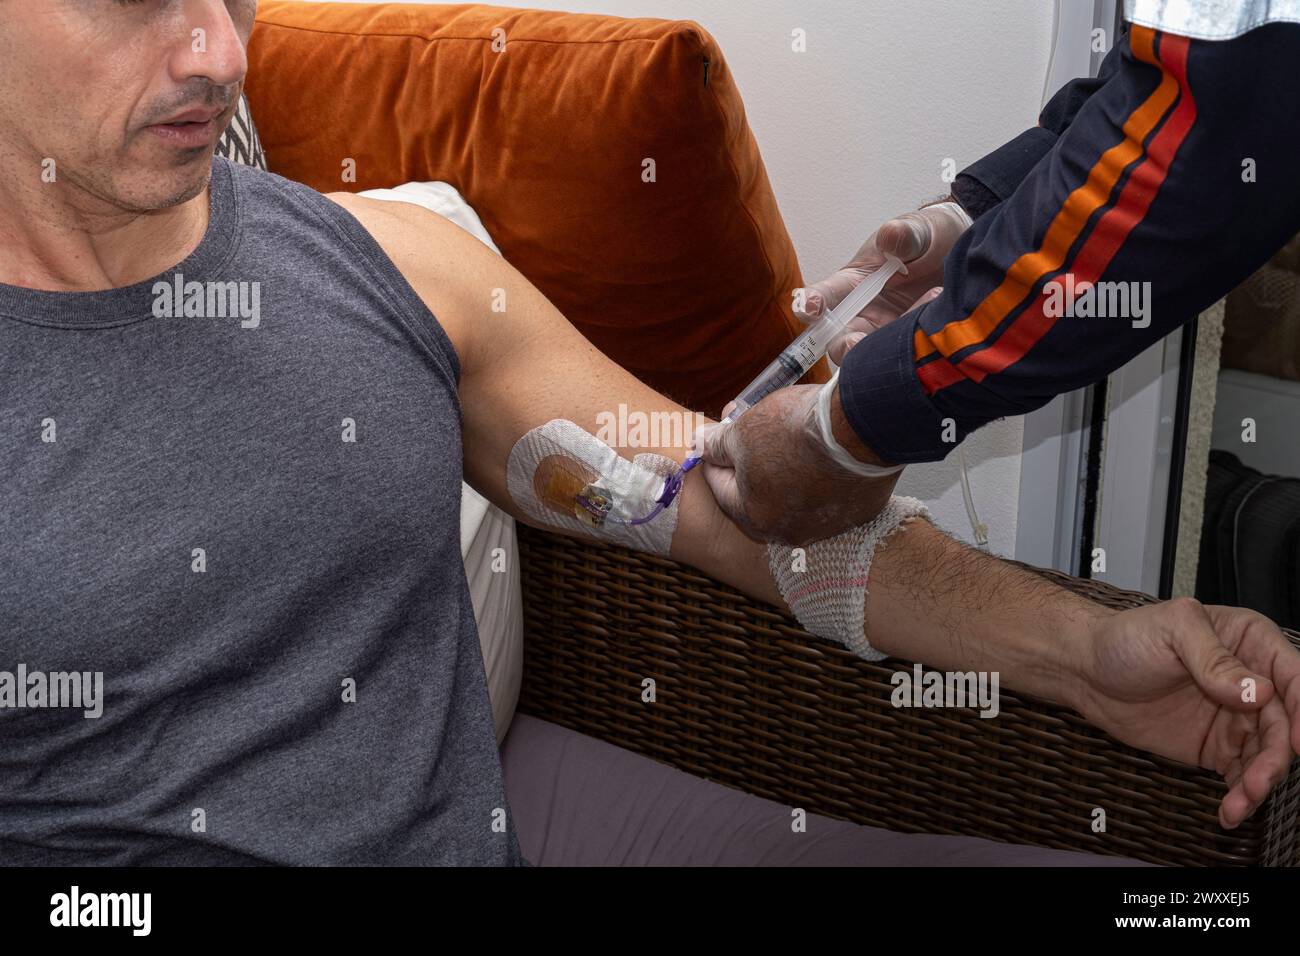 Nurse, with protective gloves, applying serum to clean the catheter. Stock Photo